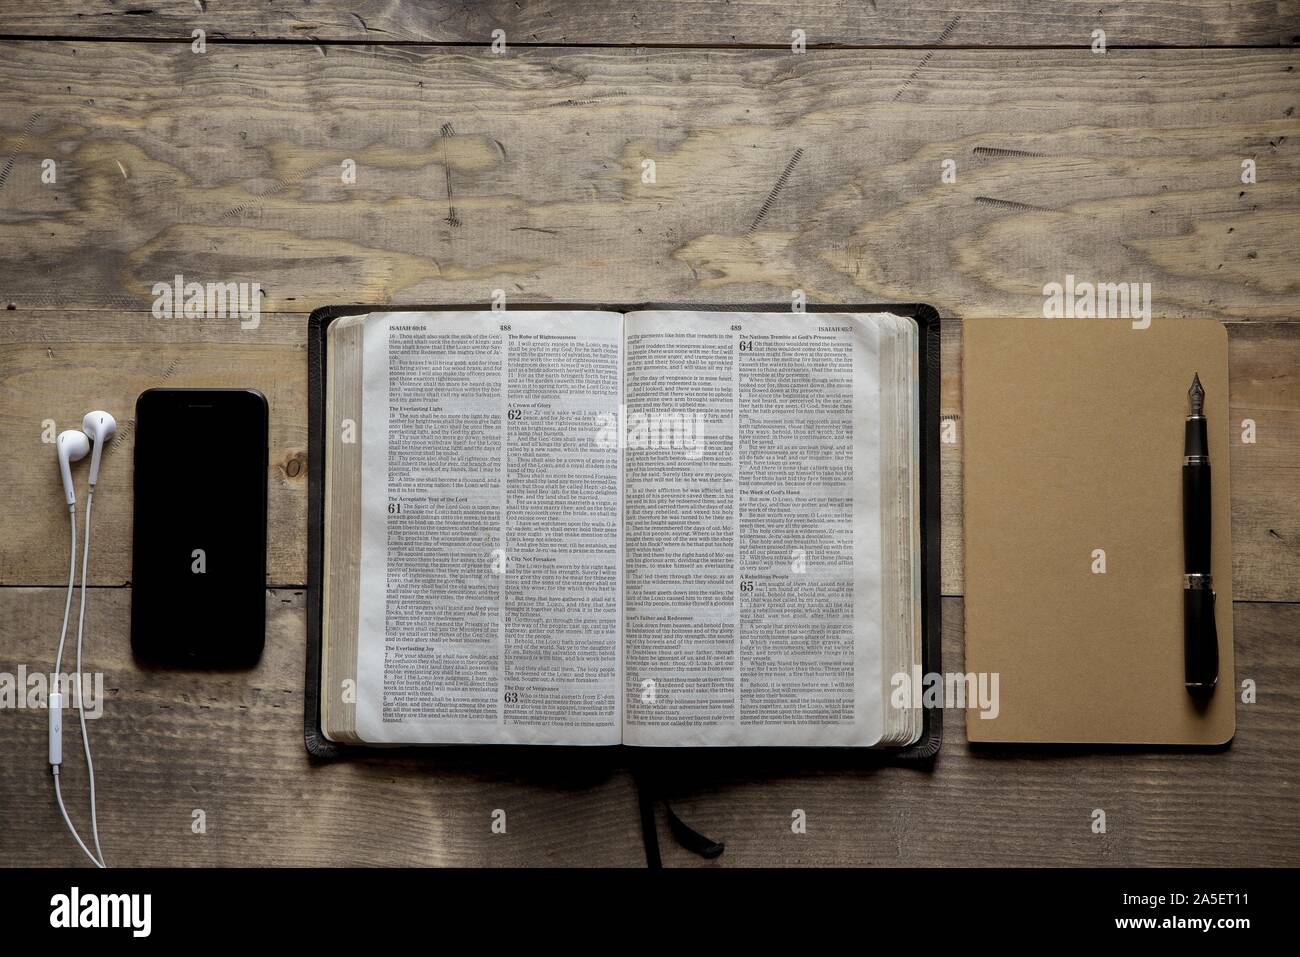 Overhead shot of opened bible in the middle of a notebook and a smartphone on a wooden surface Stock Photo